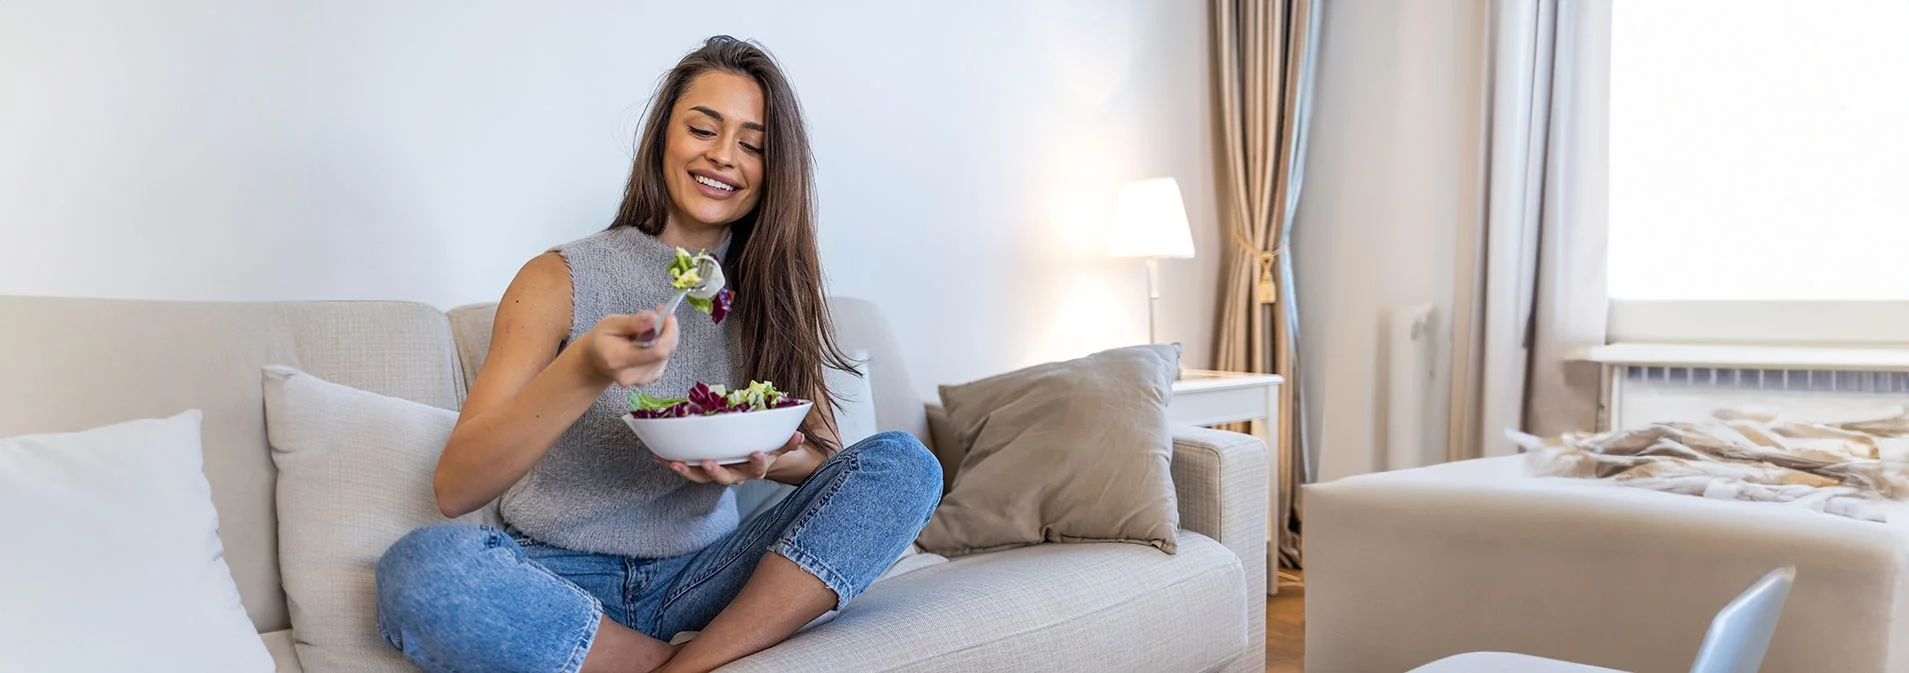 A woman sitting on a white couch eating a salad out of a bowl.